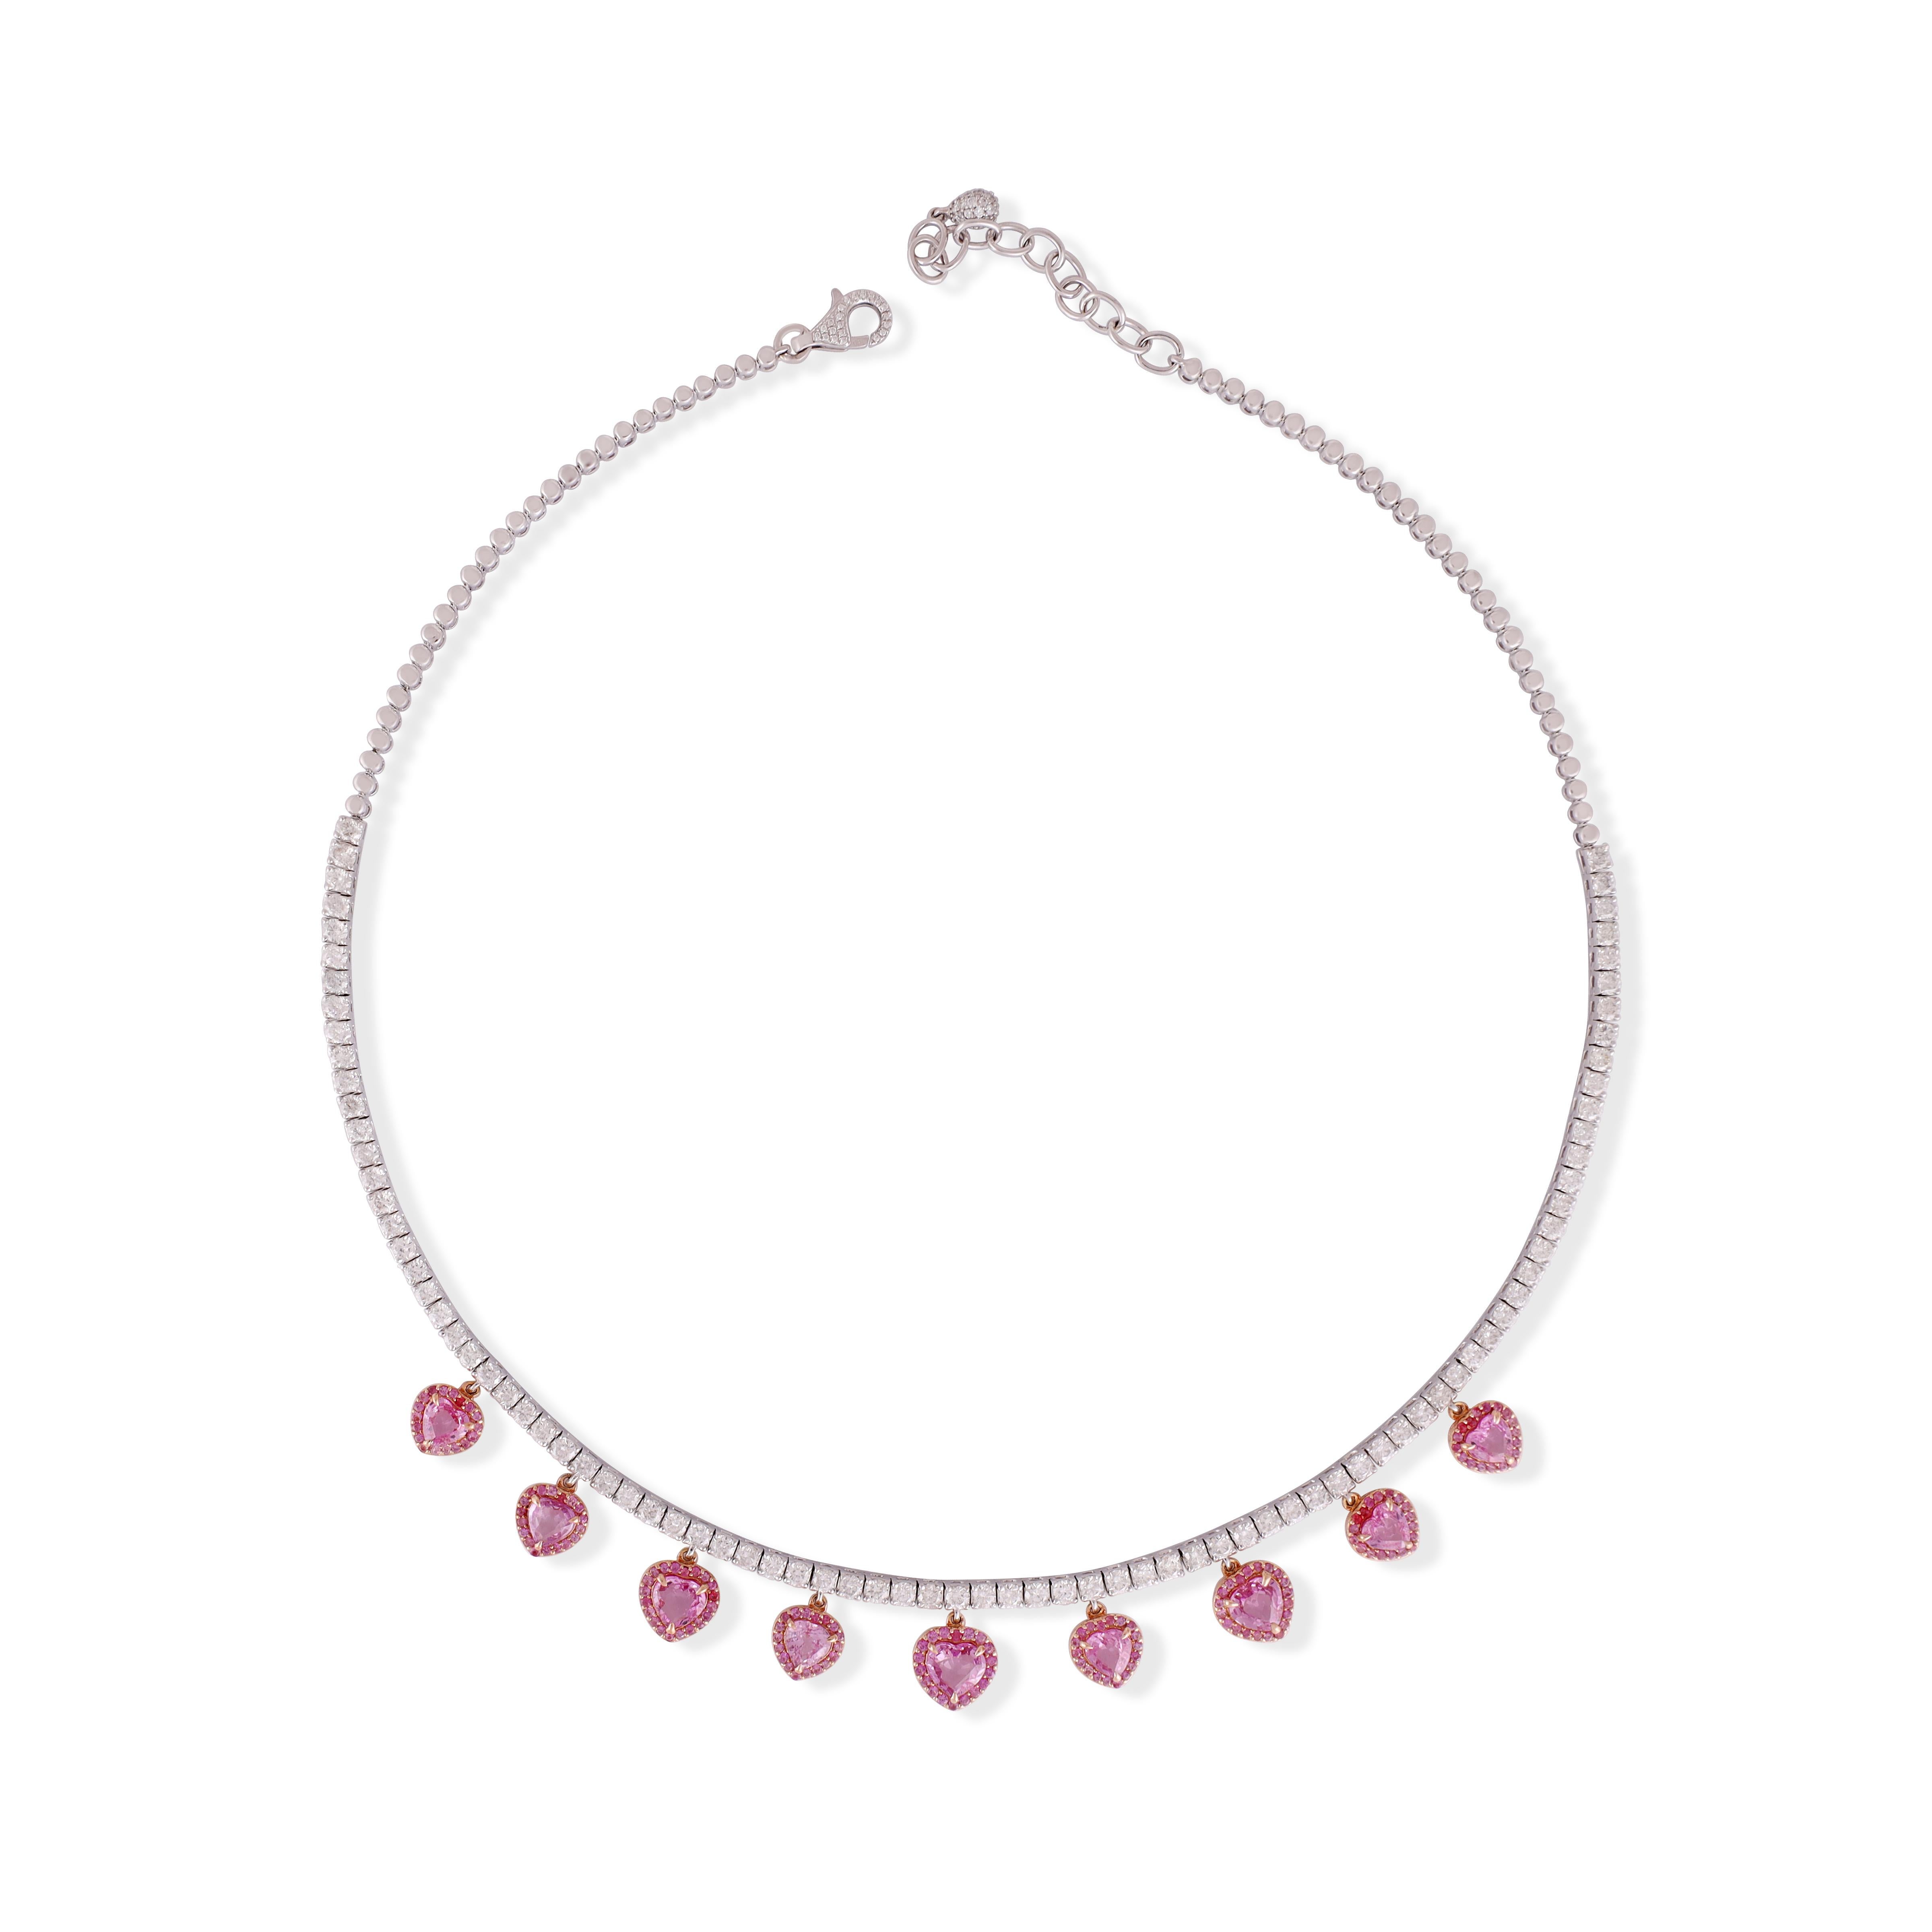 6.59 Carat Pink Sapphire & Diamond Chain Necklace in 18k White Gold 
This stunning piece of jewelry instantly elevates a casual look or dressy outfit. Comfortable and easy to wear, it is just as exquisite worn alone or layered with other charms for